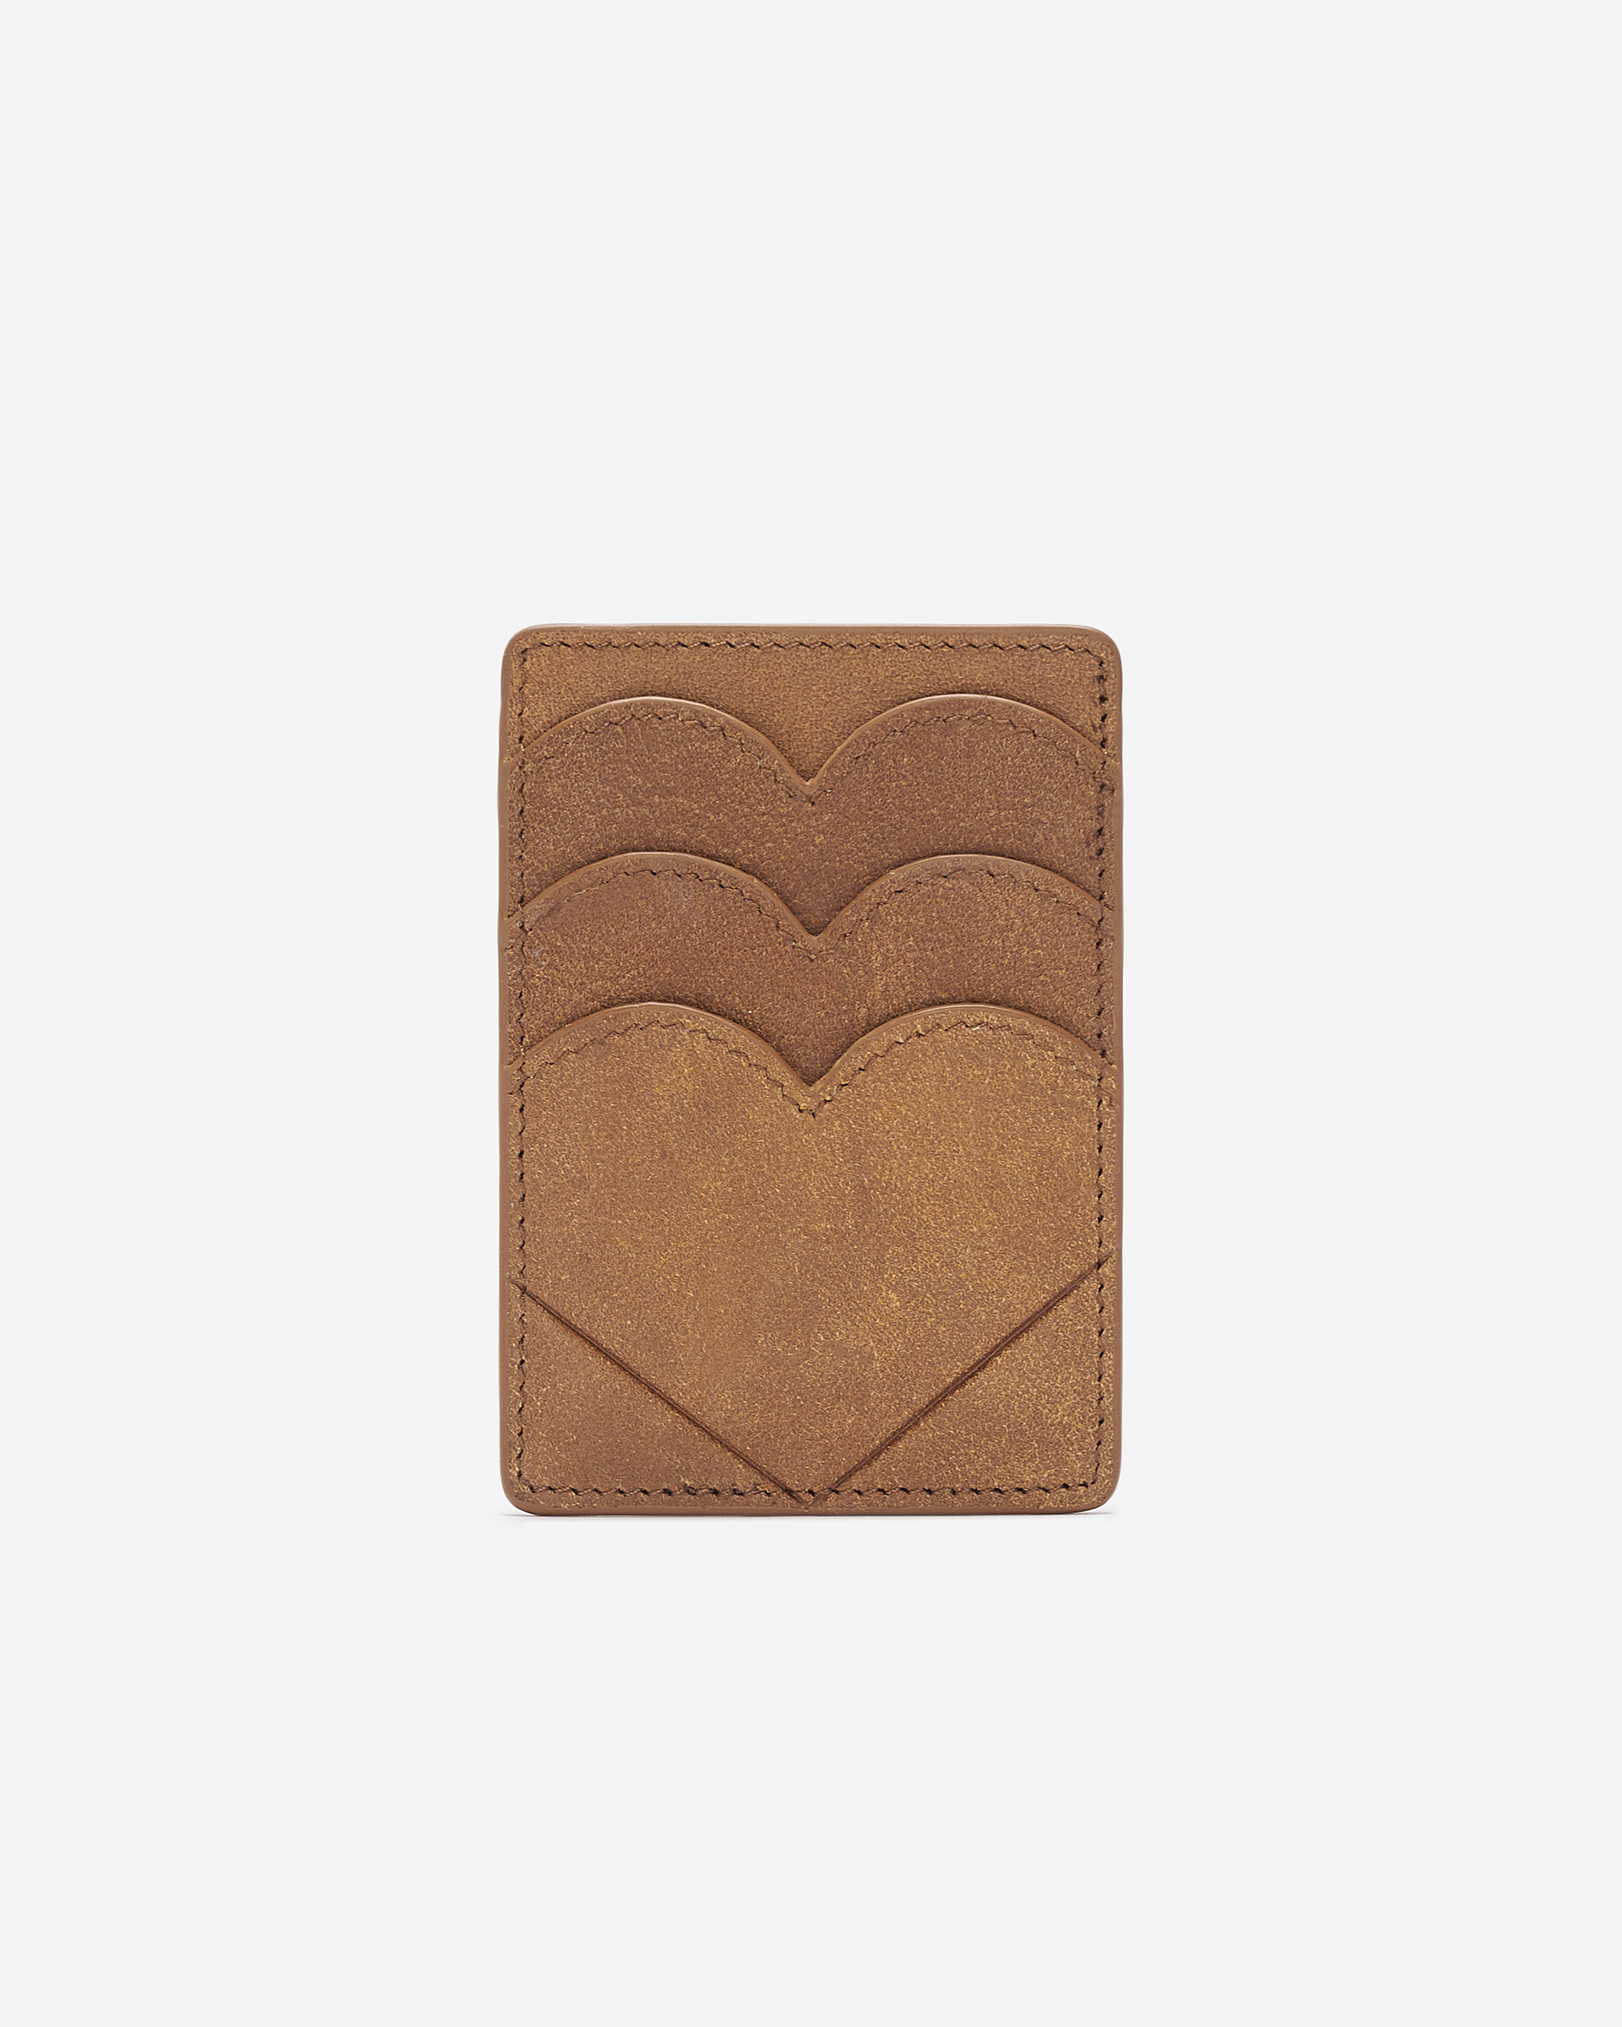 Roots Love Card Holder in Natural